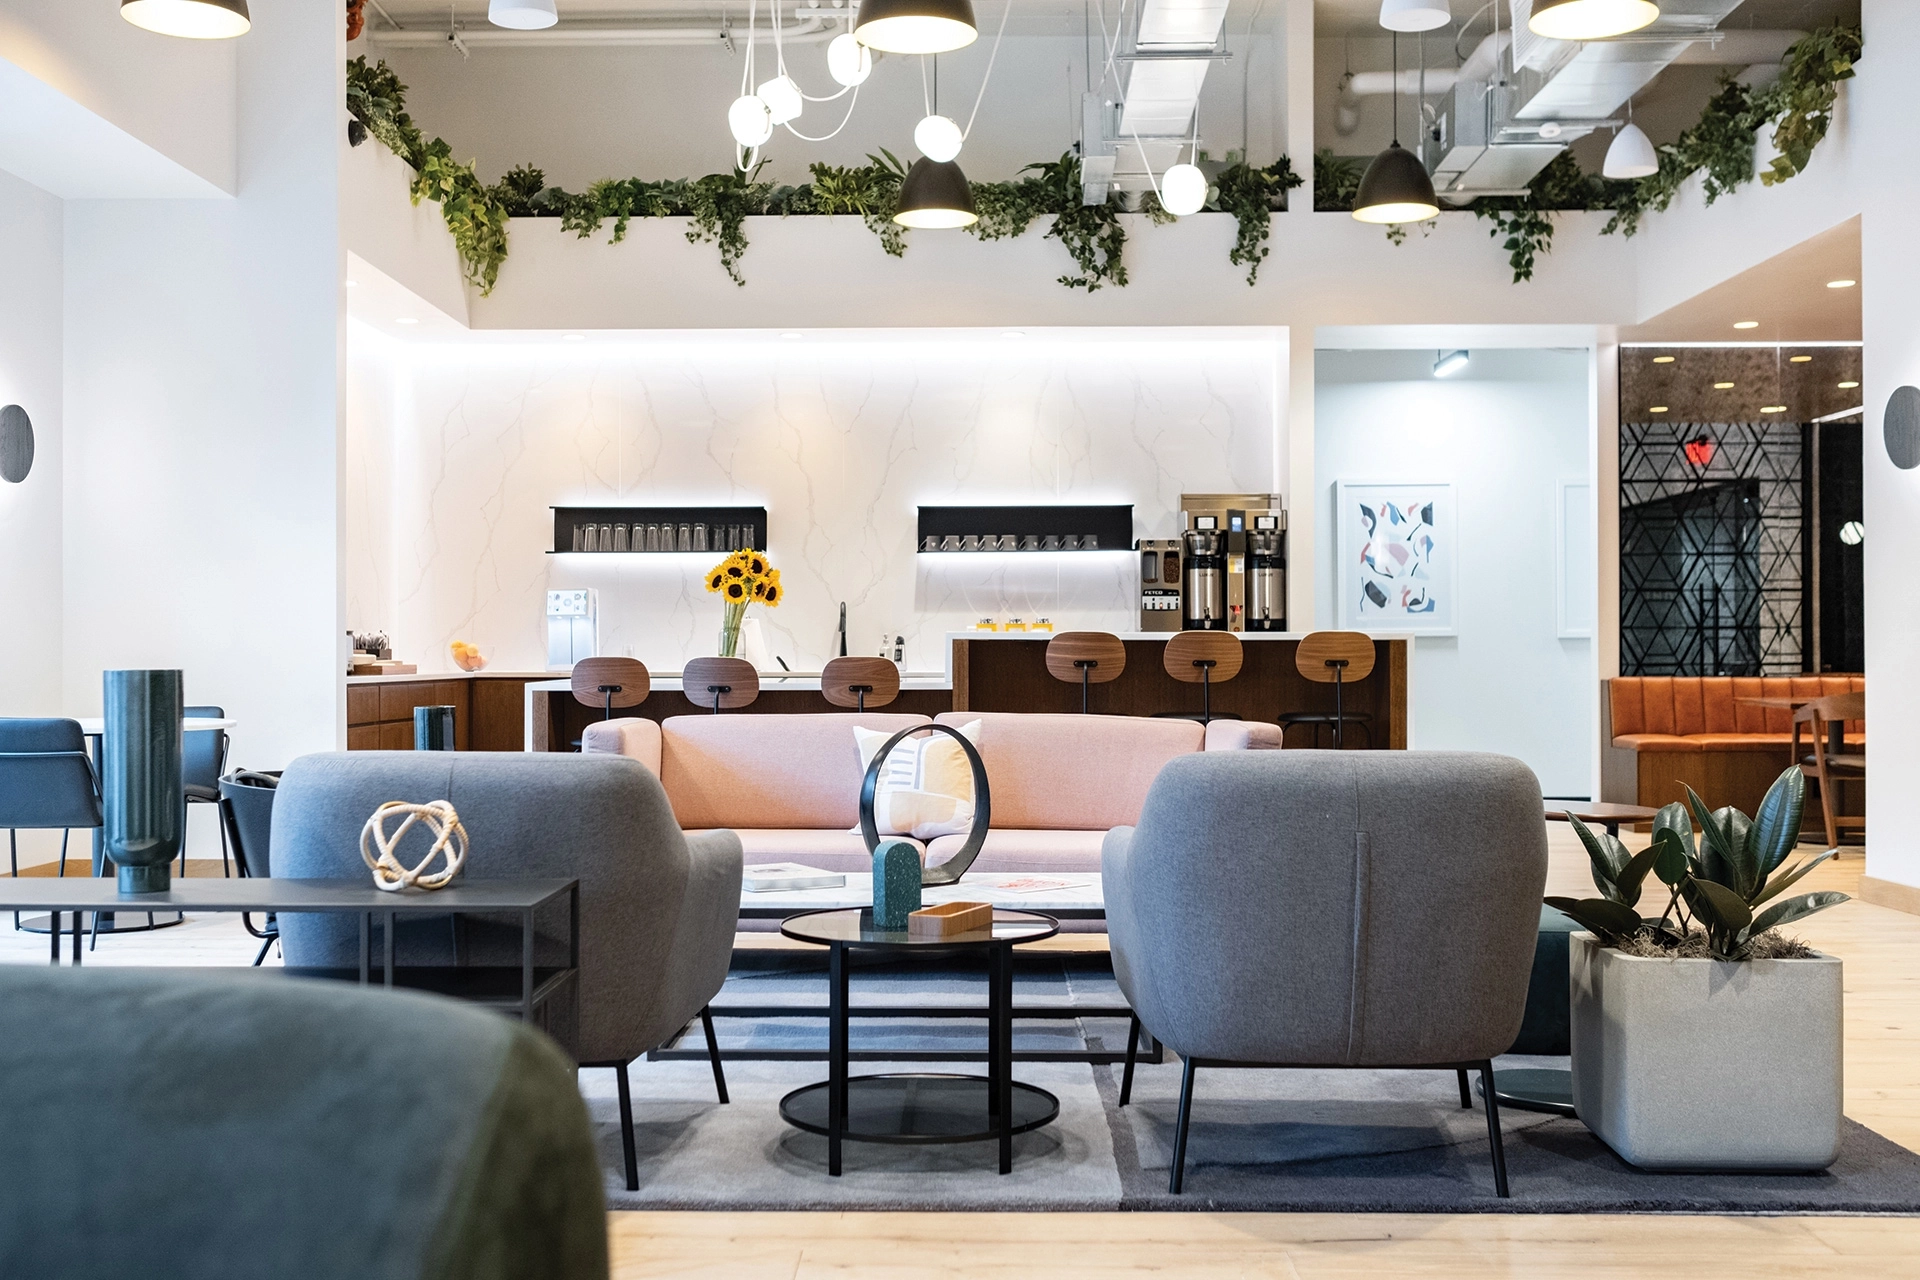 The coworking space boasts a modern office lobby, complete with comfortable couches and vibrant plants, providing an ideal workspace for productive meetings.